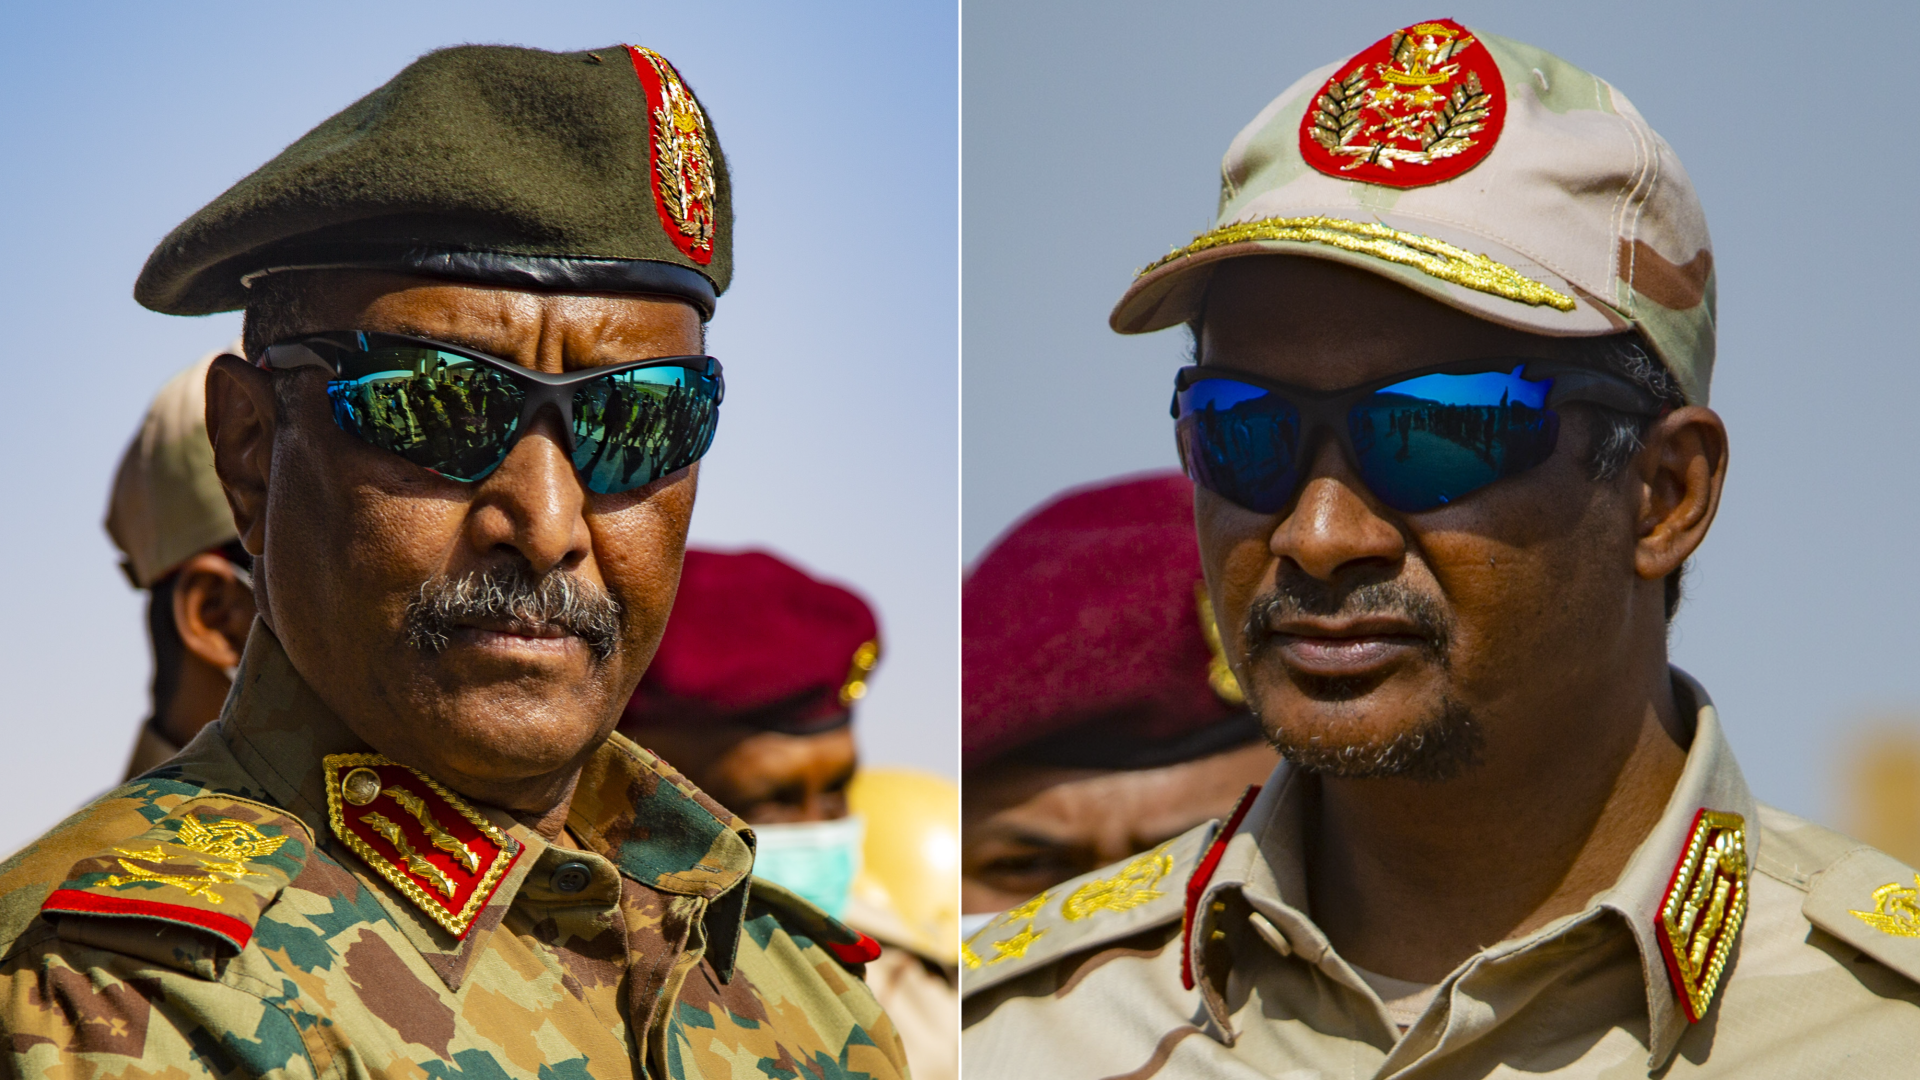 Sudan's rival generals "hold country hostage" as battle of egos turns deadly